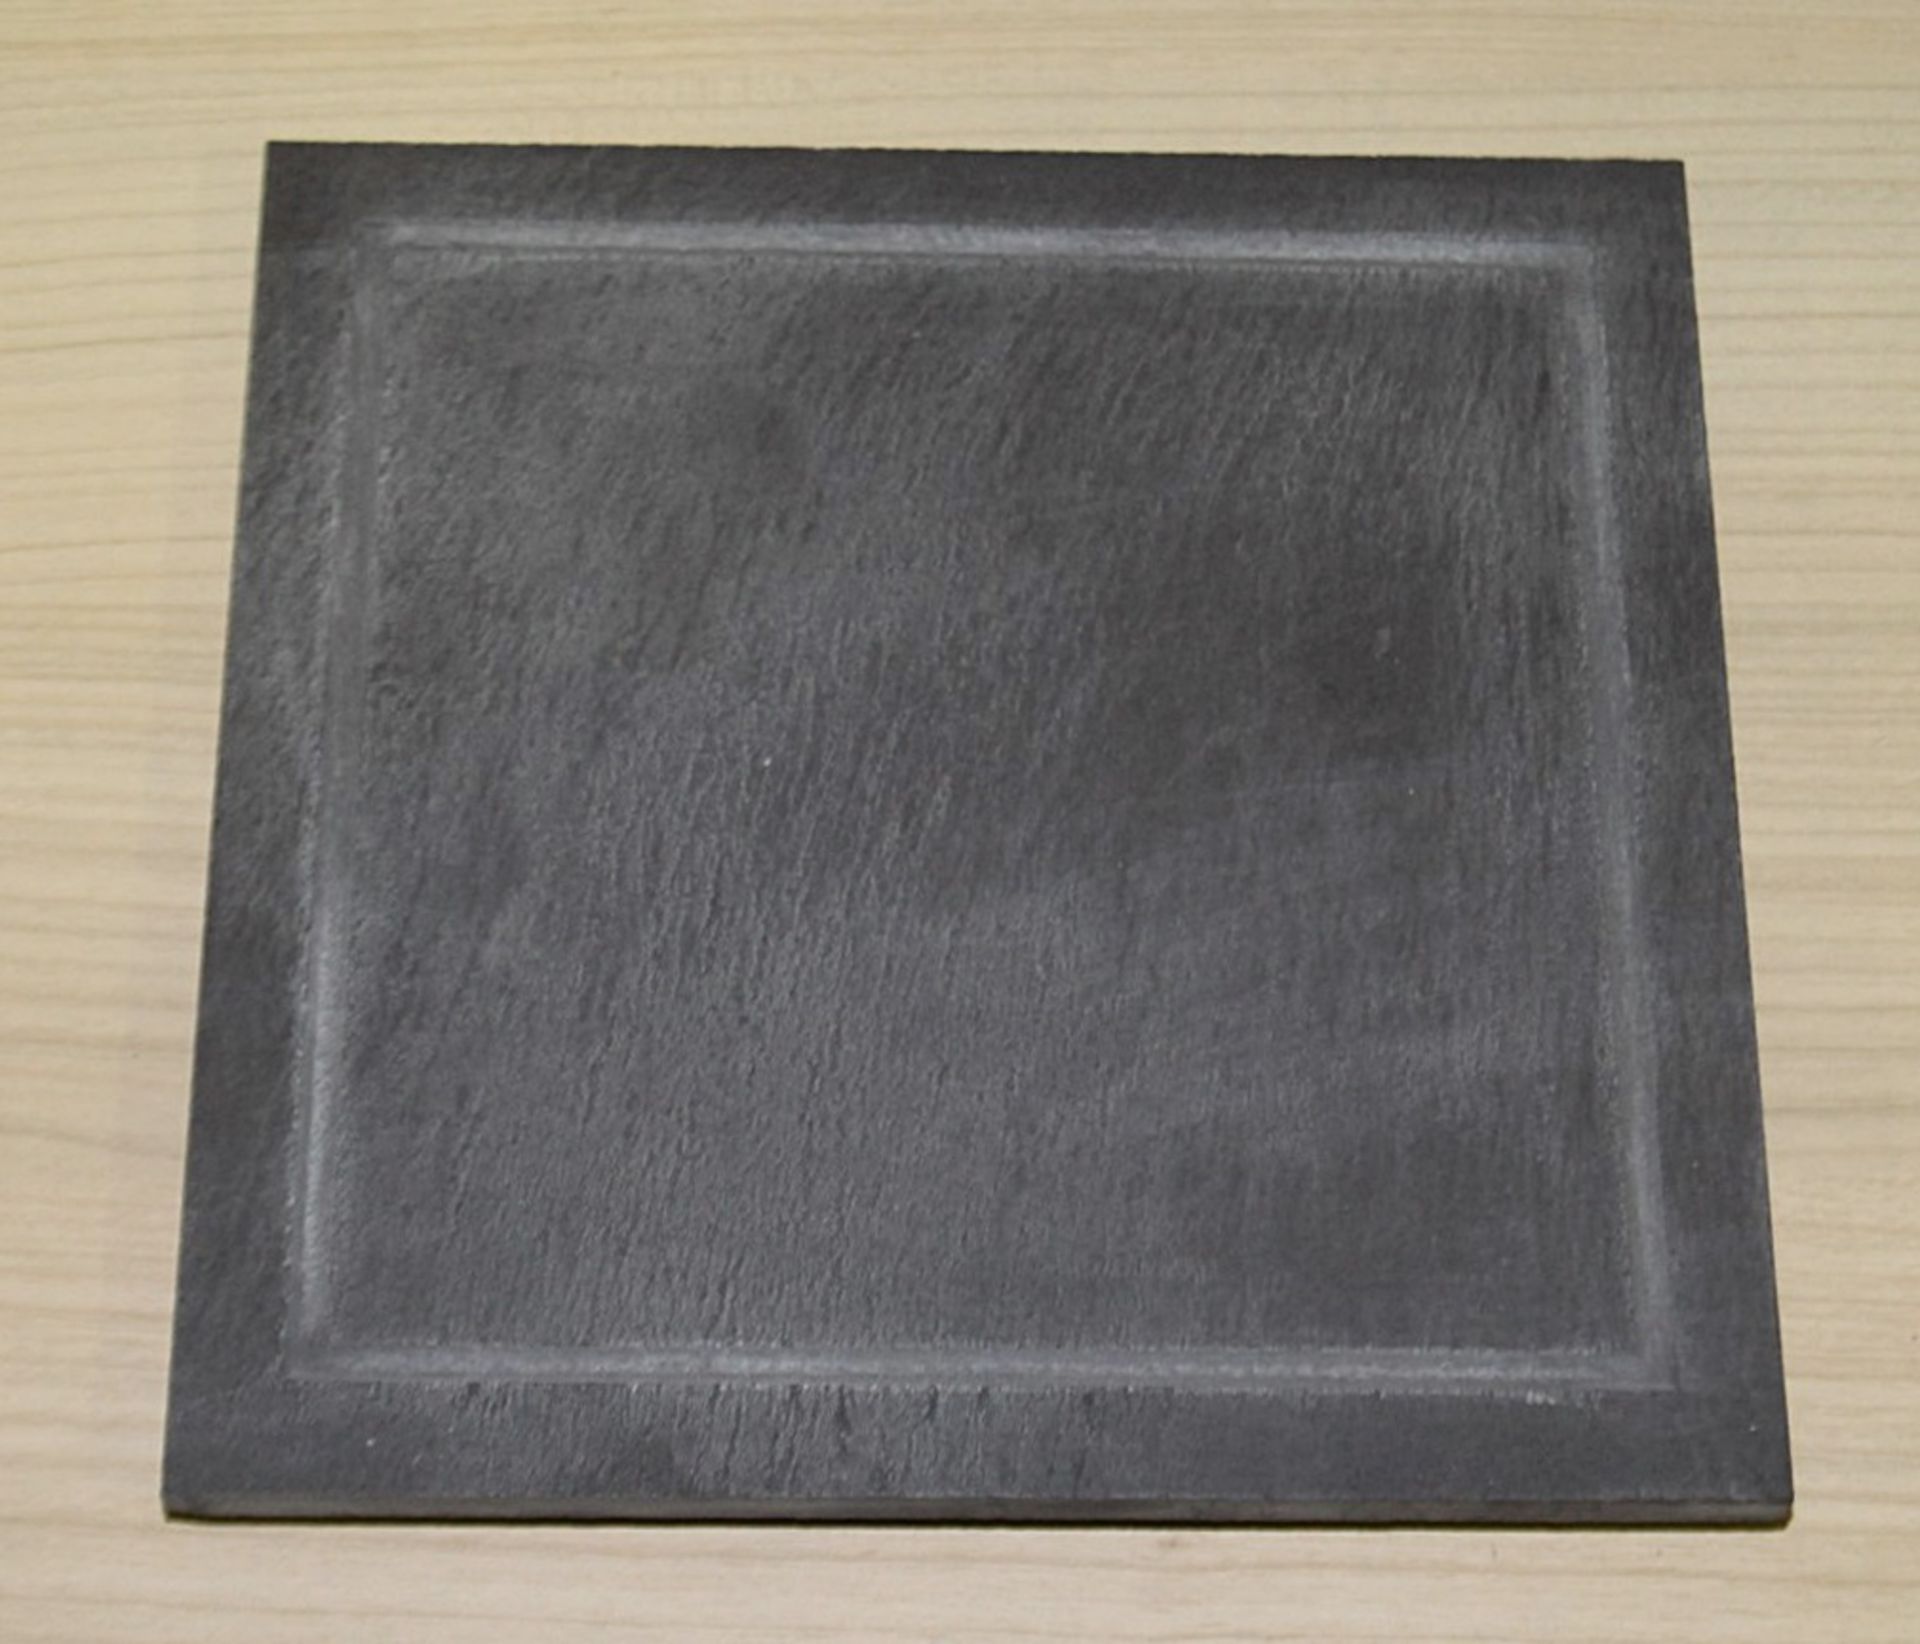 30 x Commercial Square Dining Natural British Dining Slates With Feet - Dimesions: H2 x W21 x D21cm